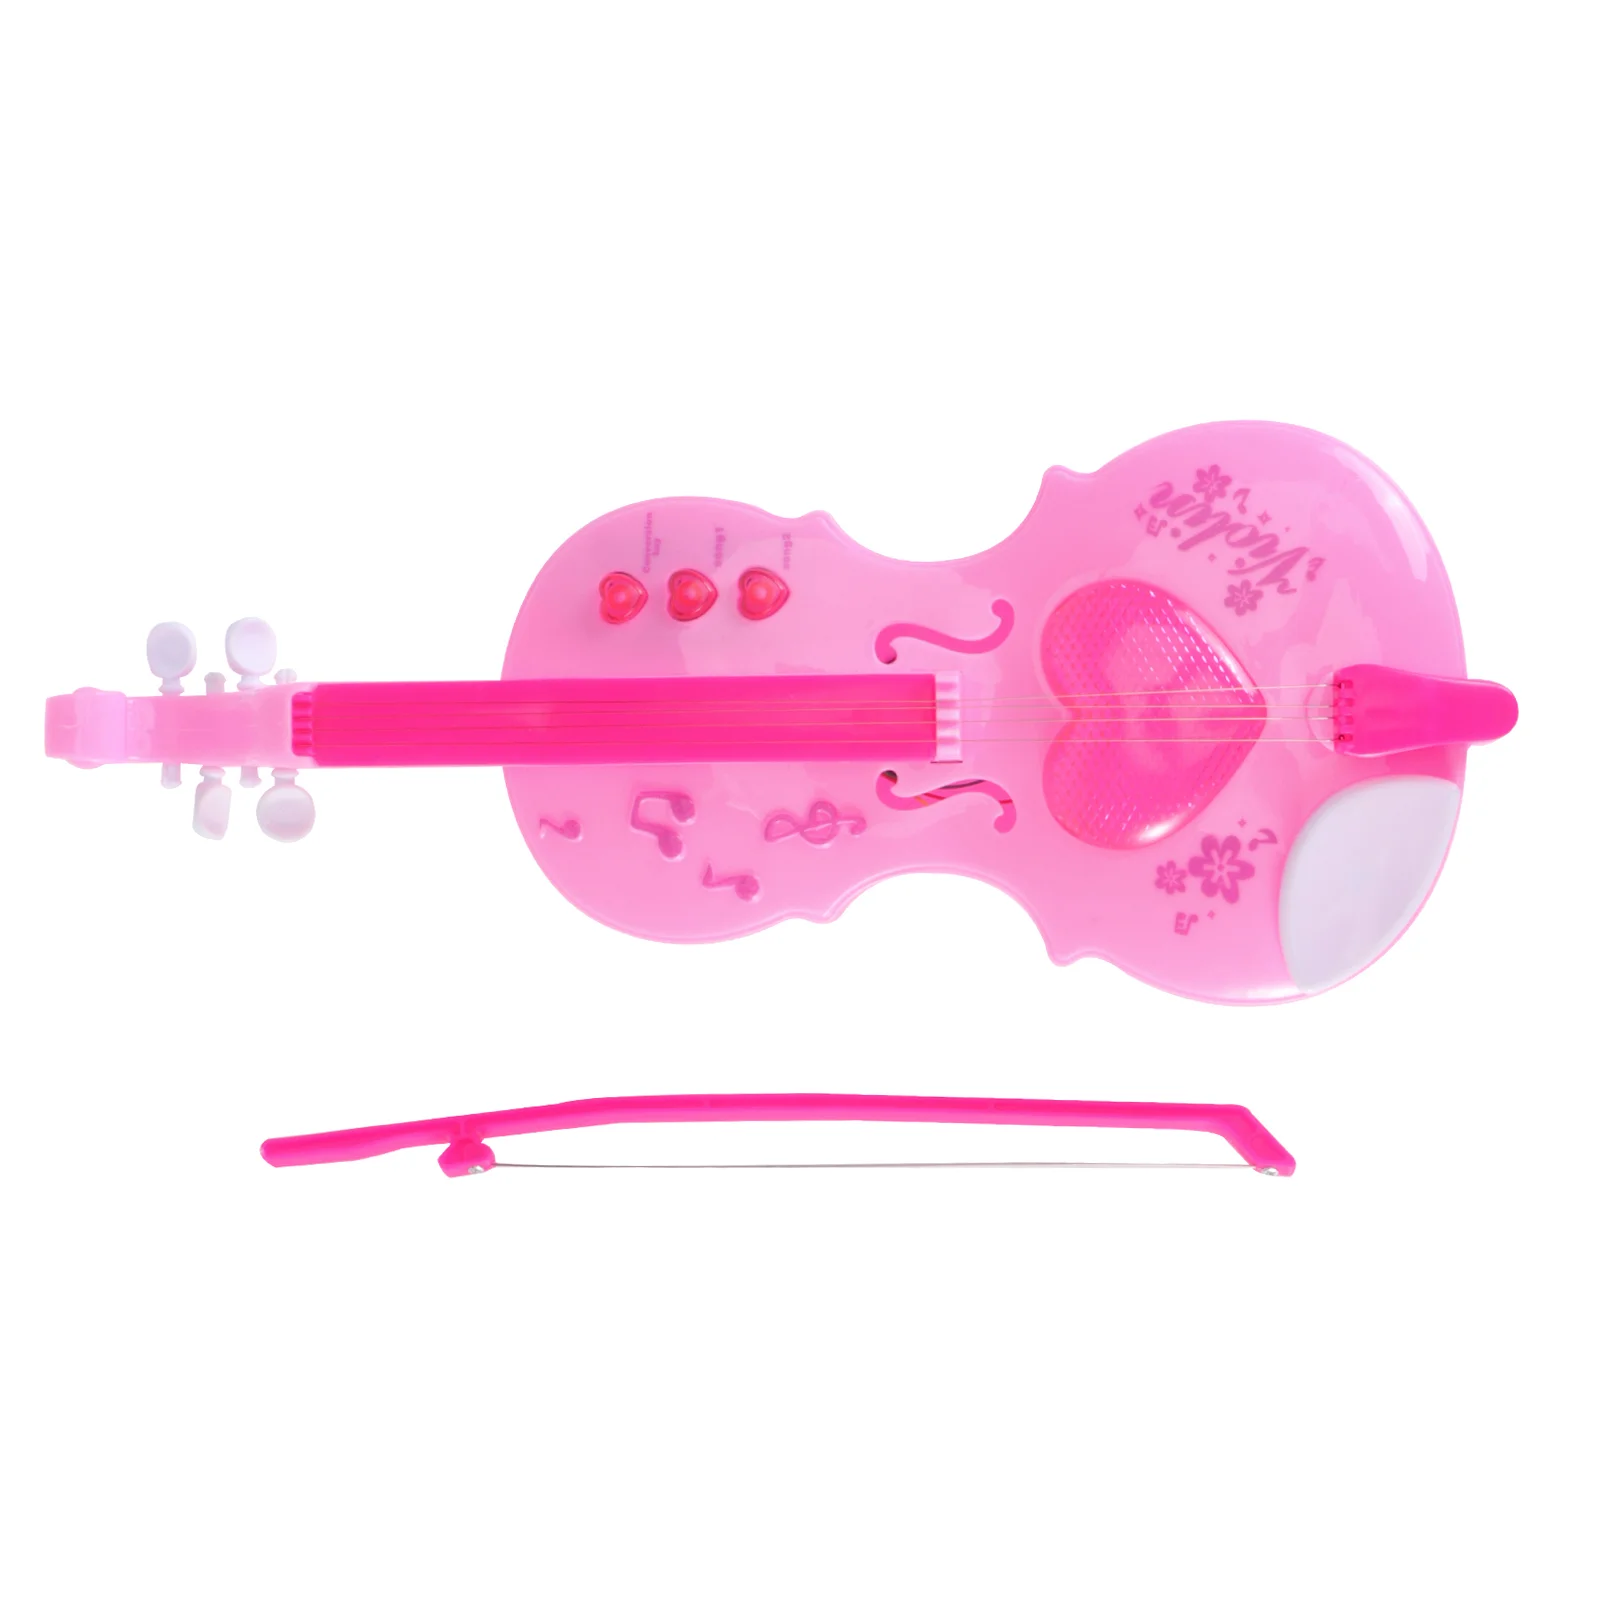 

Kids Simulation Violin Toy Creative Musical Instruments Children Early Educational Learning Toys Kids Gifts